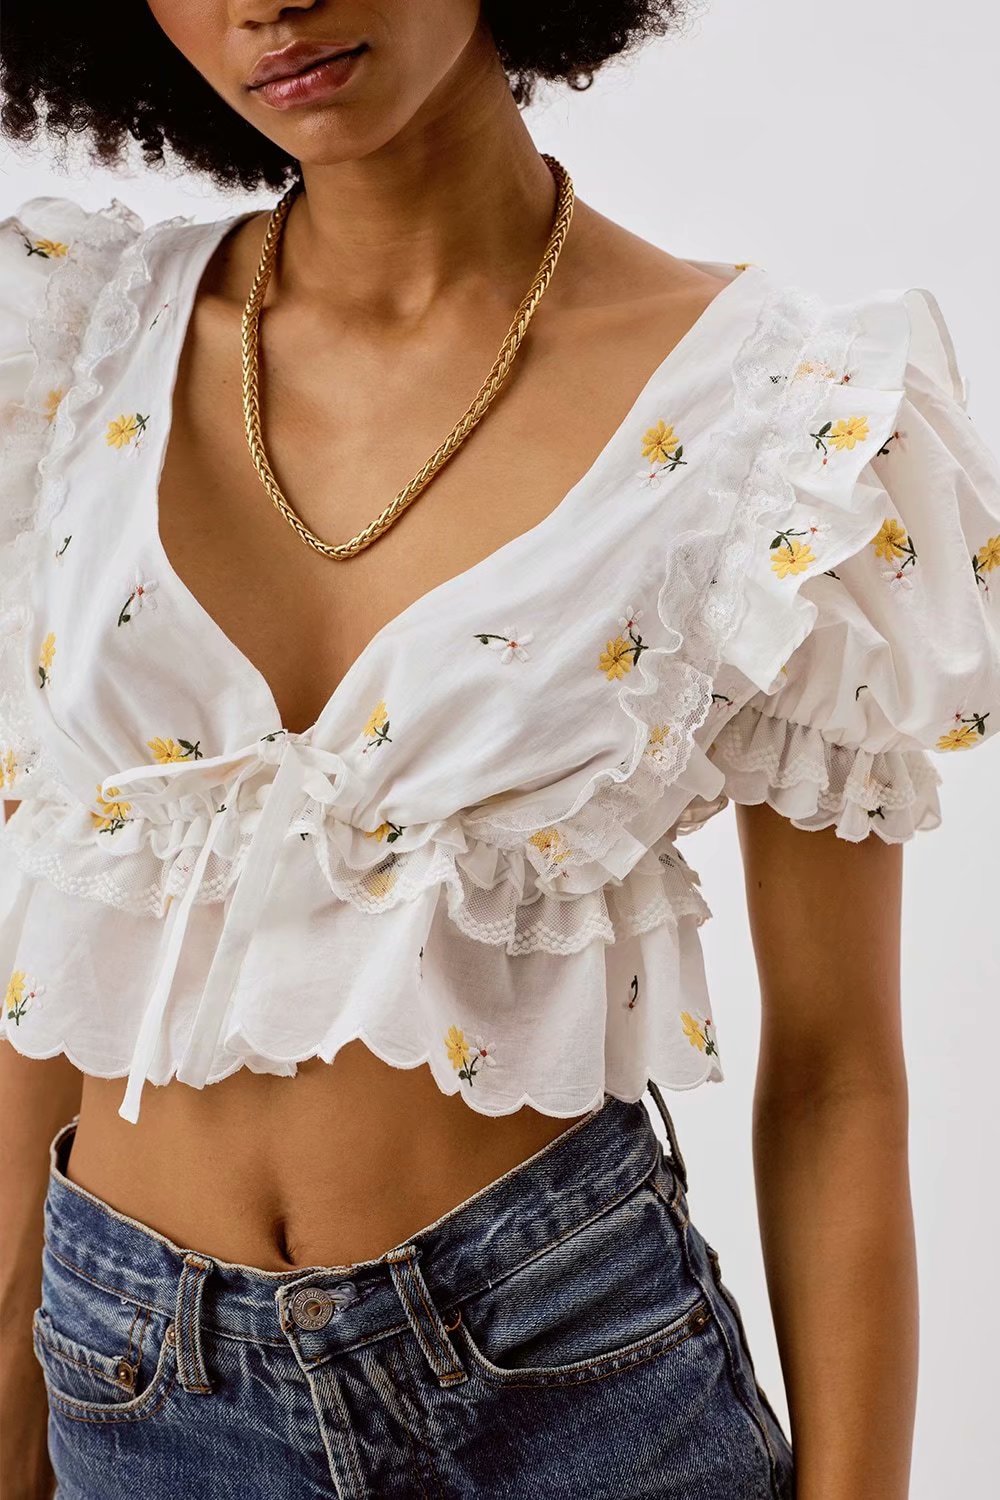 OOTDGIRL Women Sweet Fashion Floral Embroidery Ruffled Blouses Vintage V Neck Short Sleeve Female Shirts Blusas Chic Tops